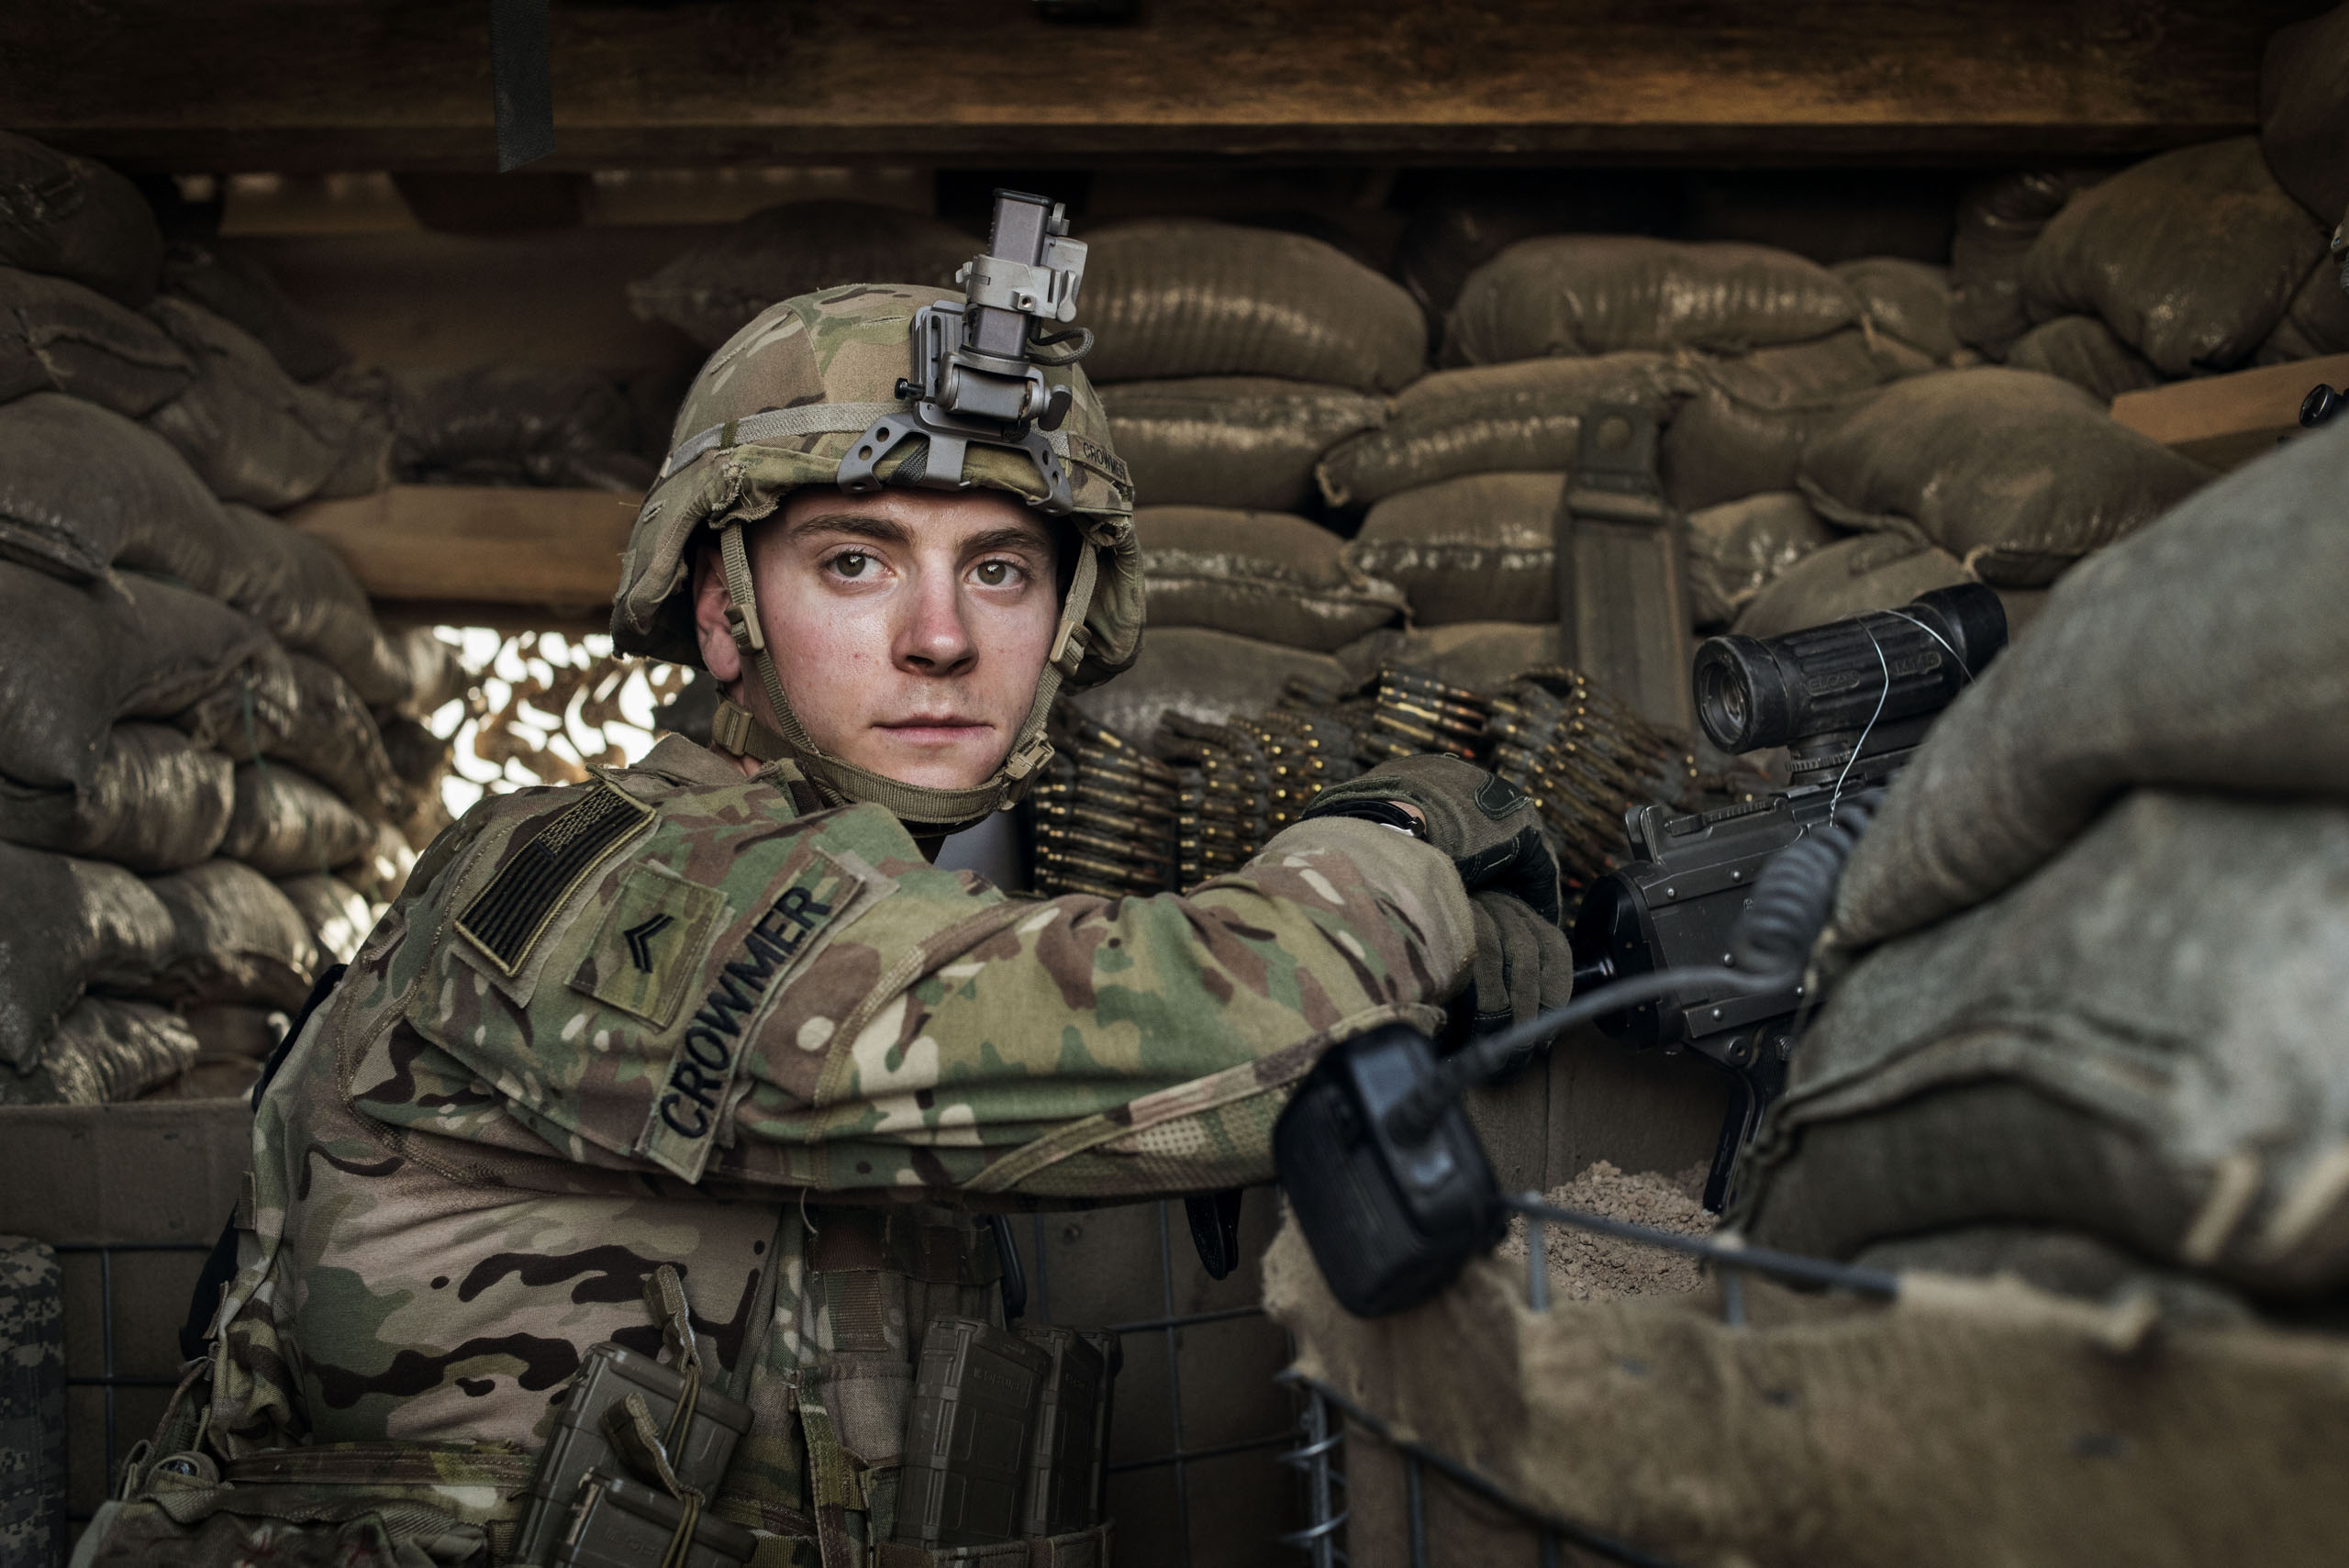 A U.S. Army soldier John Crowmer, 23, from Noblesville, IN, guards the U.S. military base at Camp Swift, near the Iraqi town of Makhmour, May 17, 2016. As of April, at least 4,087 U.S. military personnel were deployed in Iraq, many of them backing Iraqi forces in the drive to reclaim territory from ISIS.